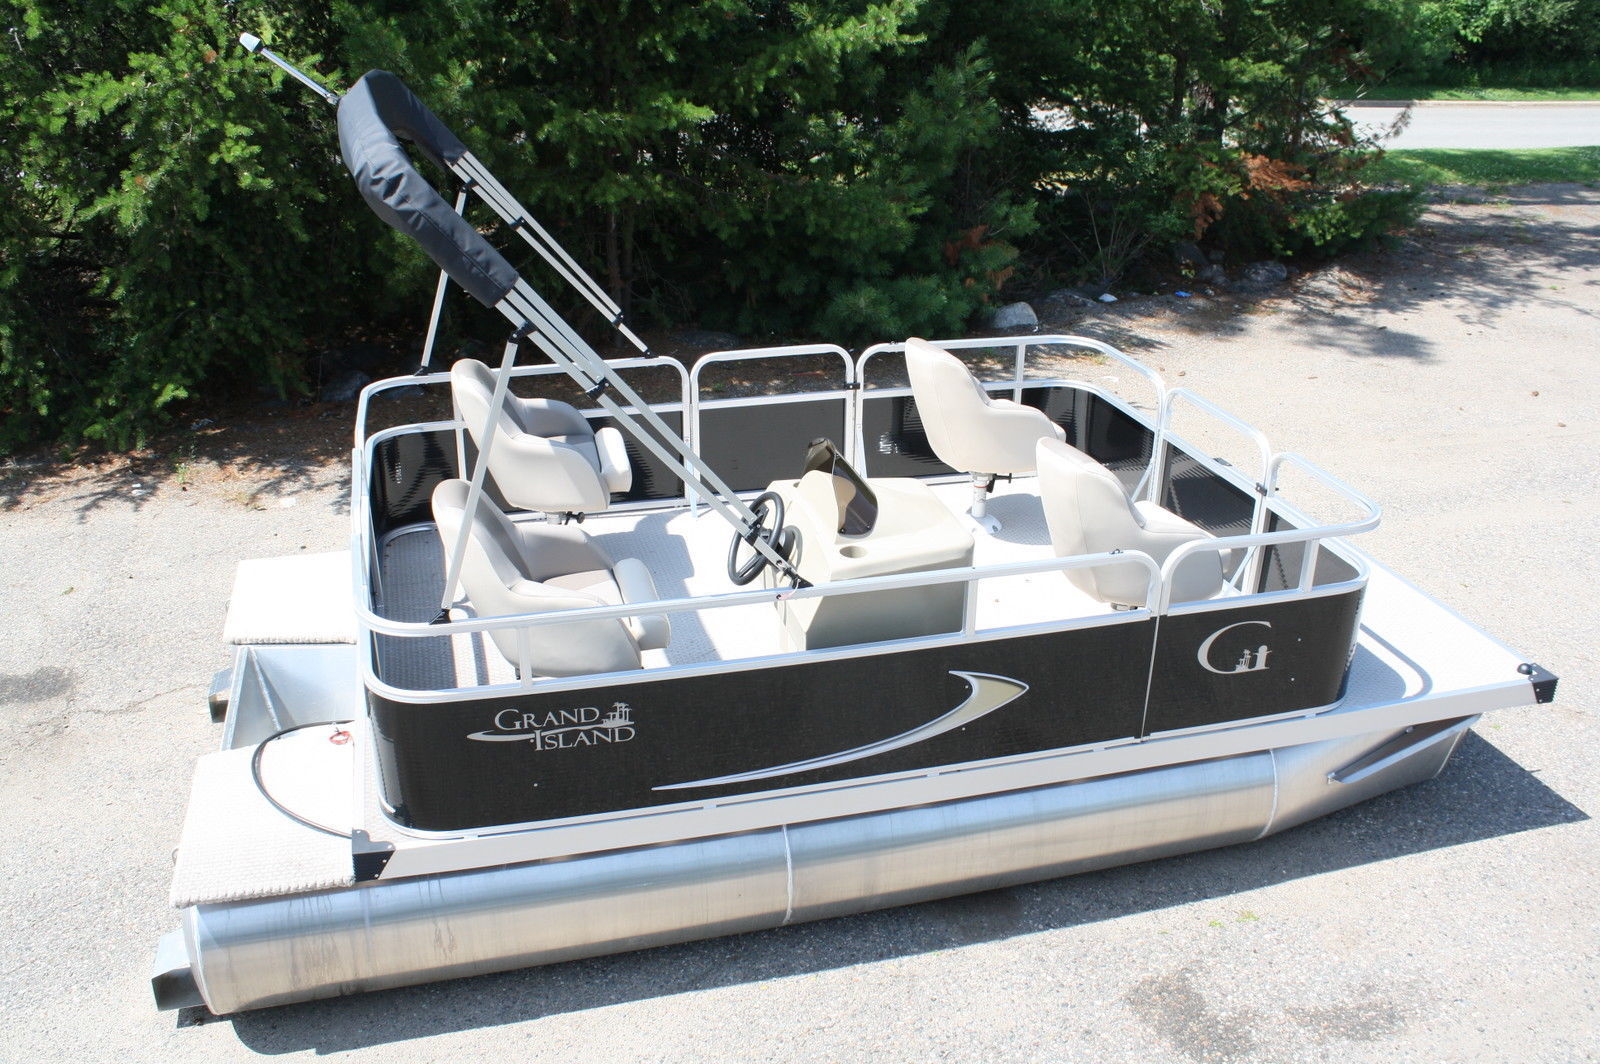 for sale a like new grand island pontoon in perfic condition close to new a...